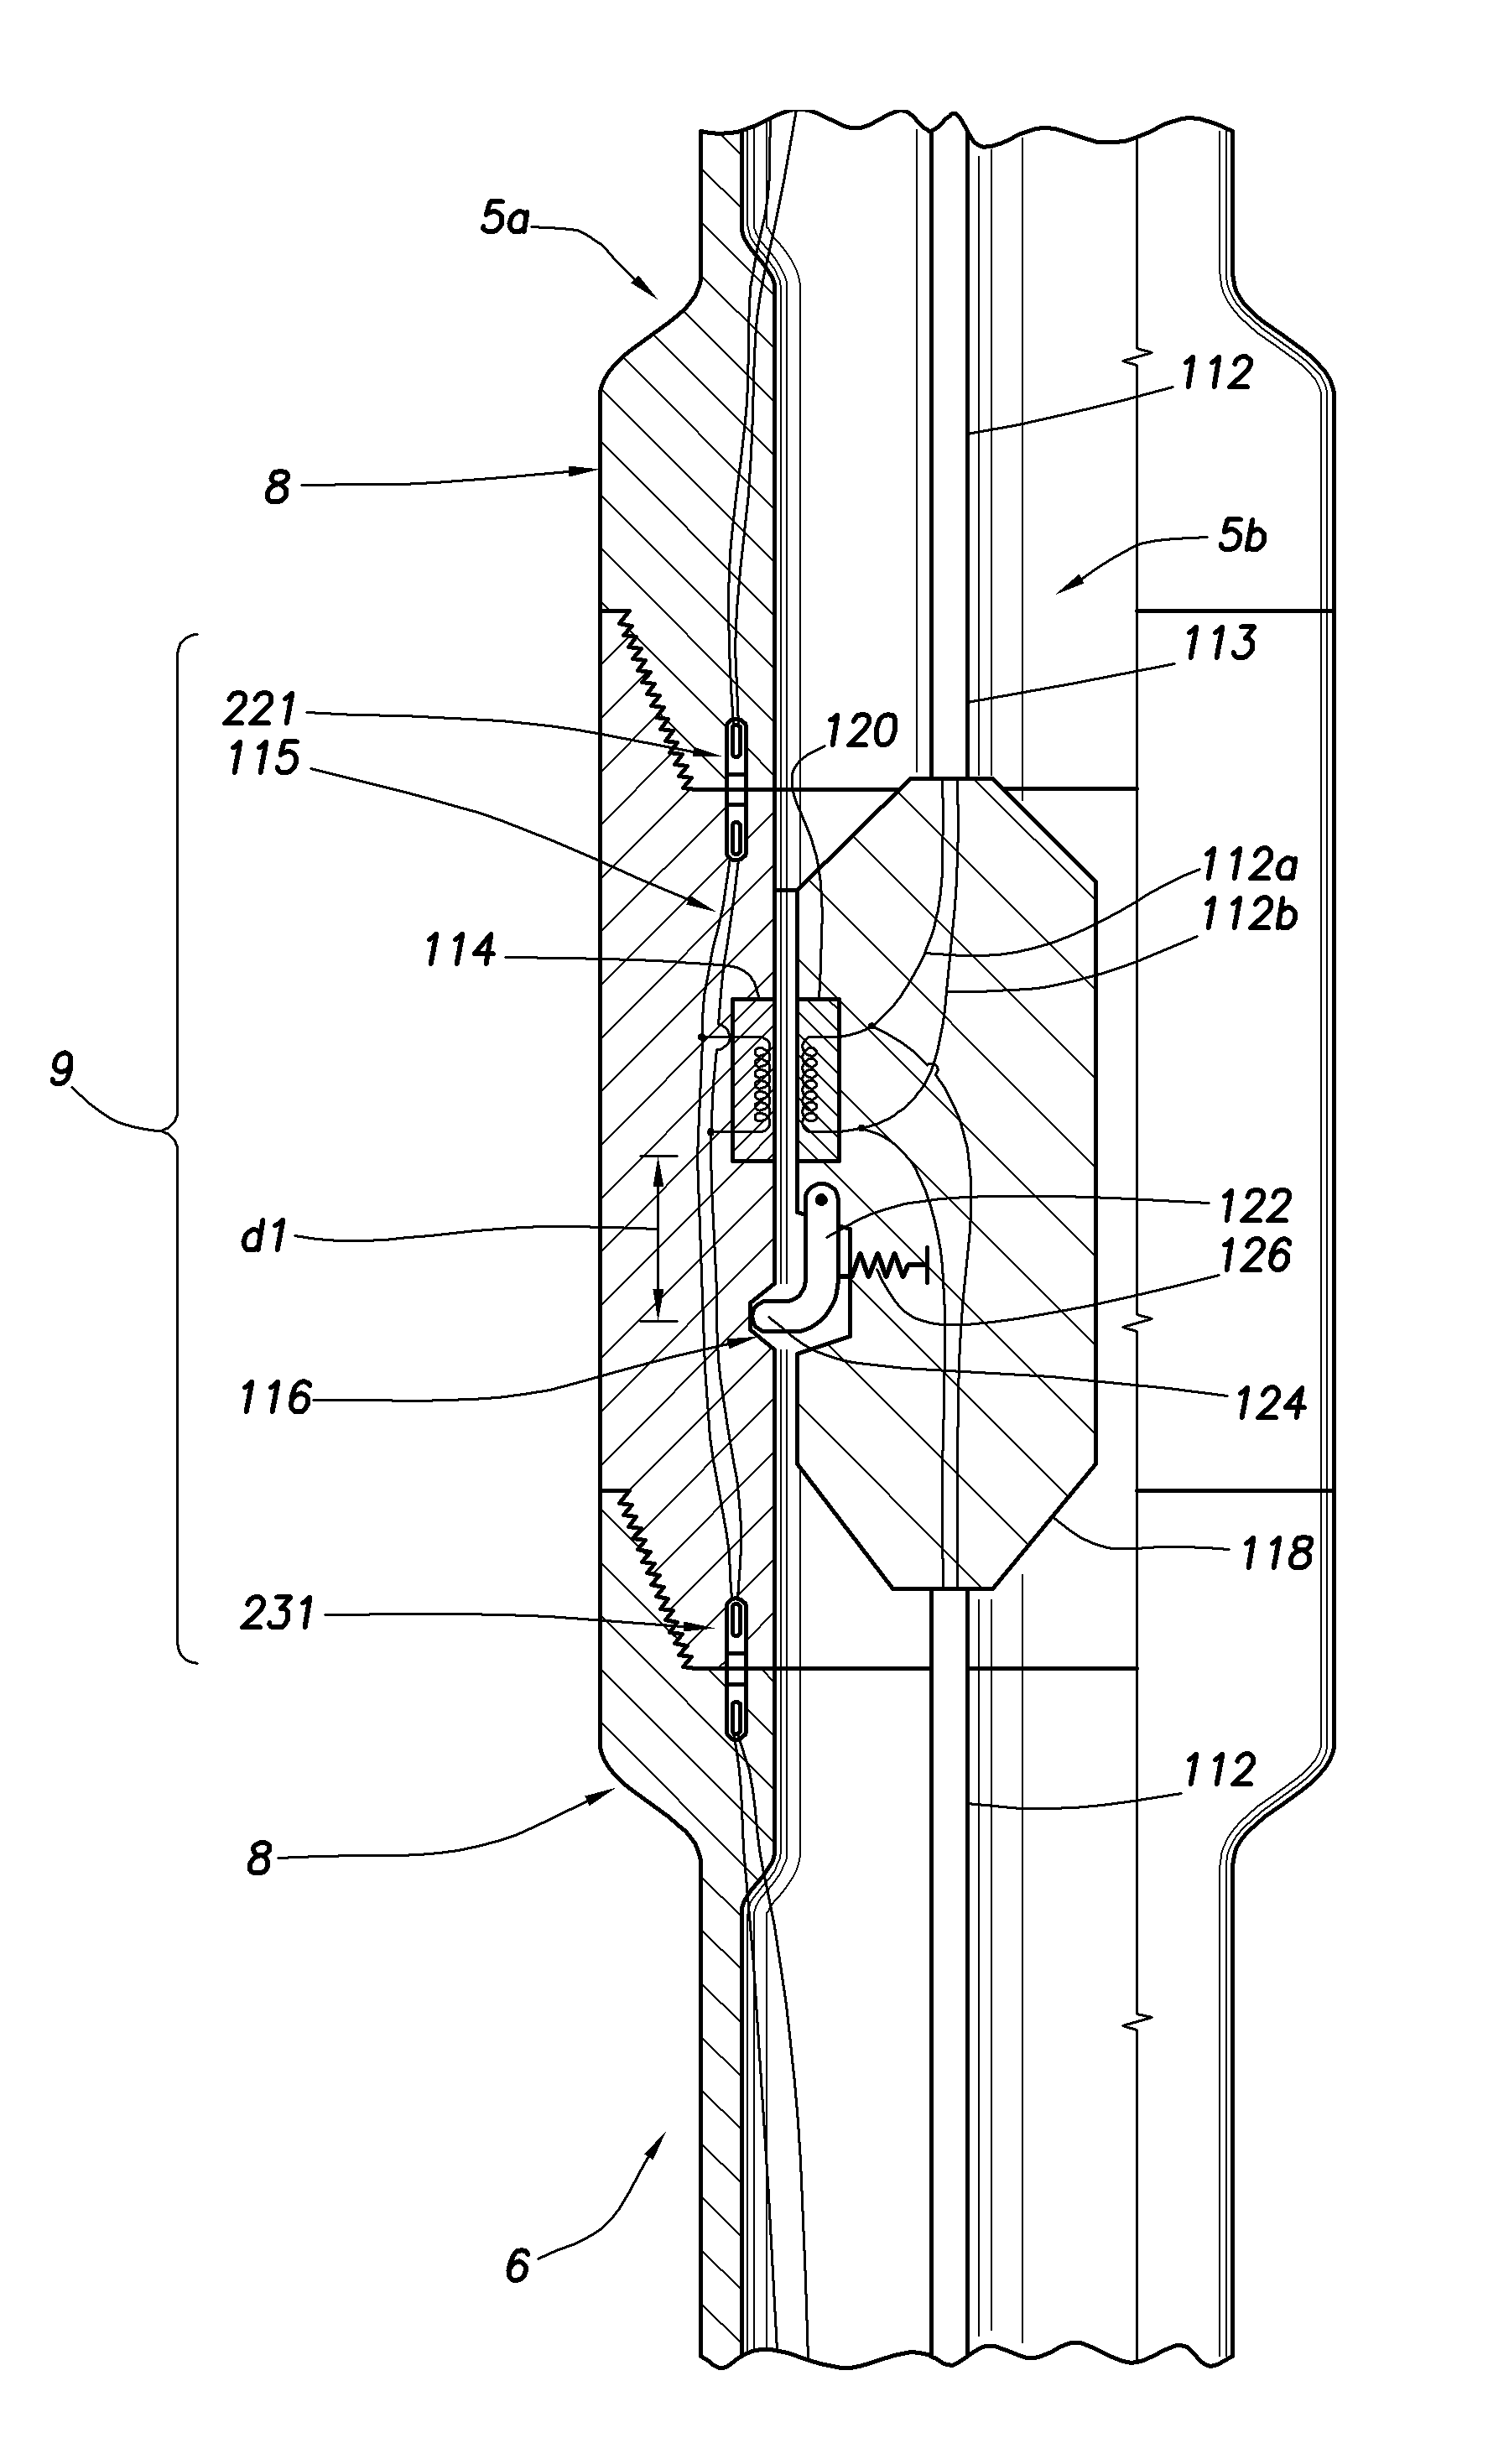 Downhole telemetry system and method